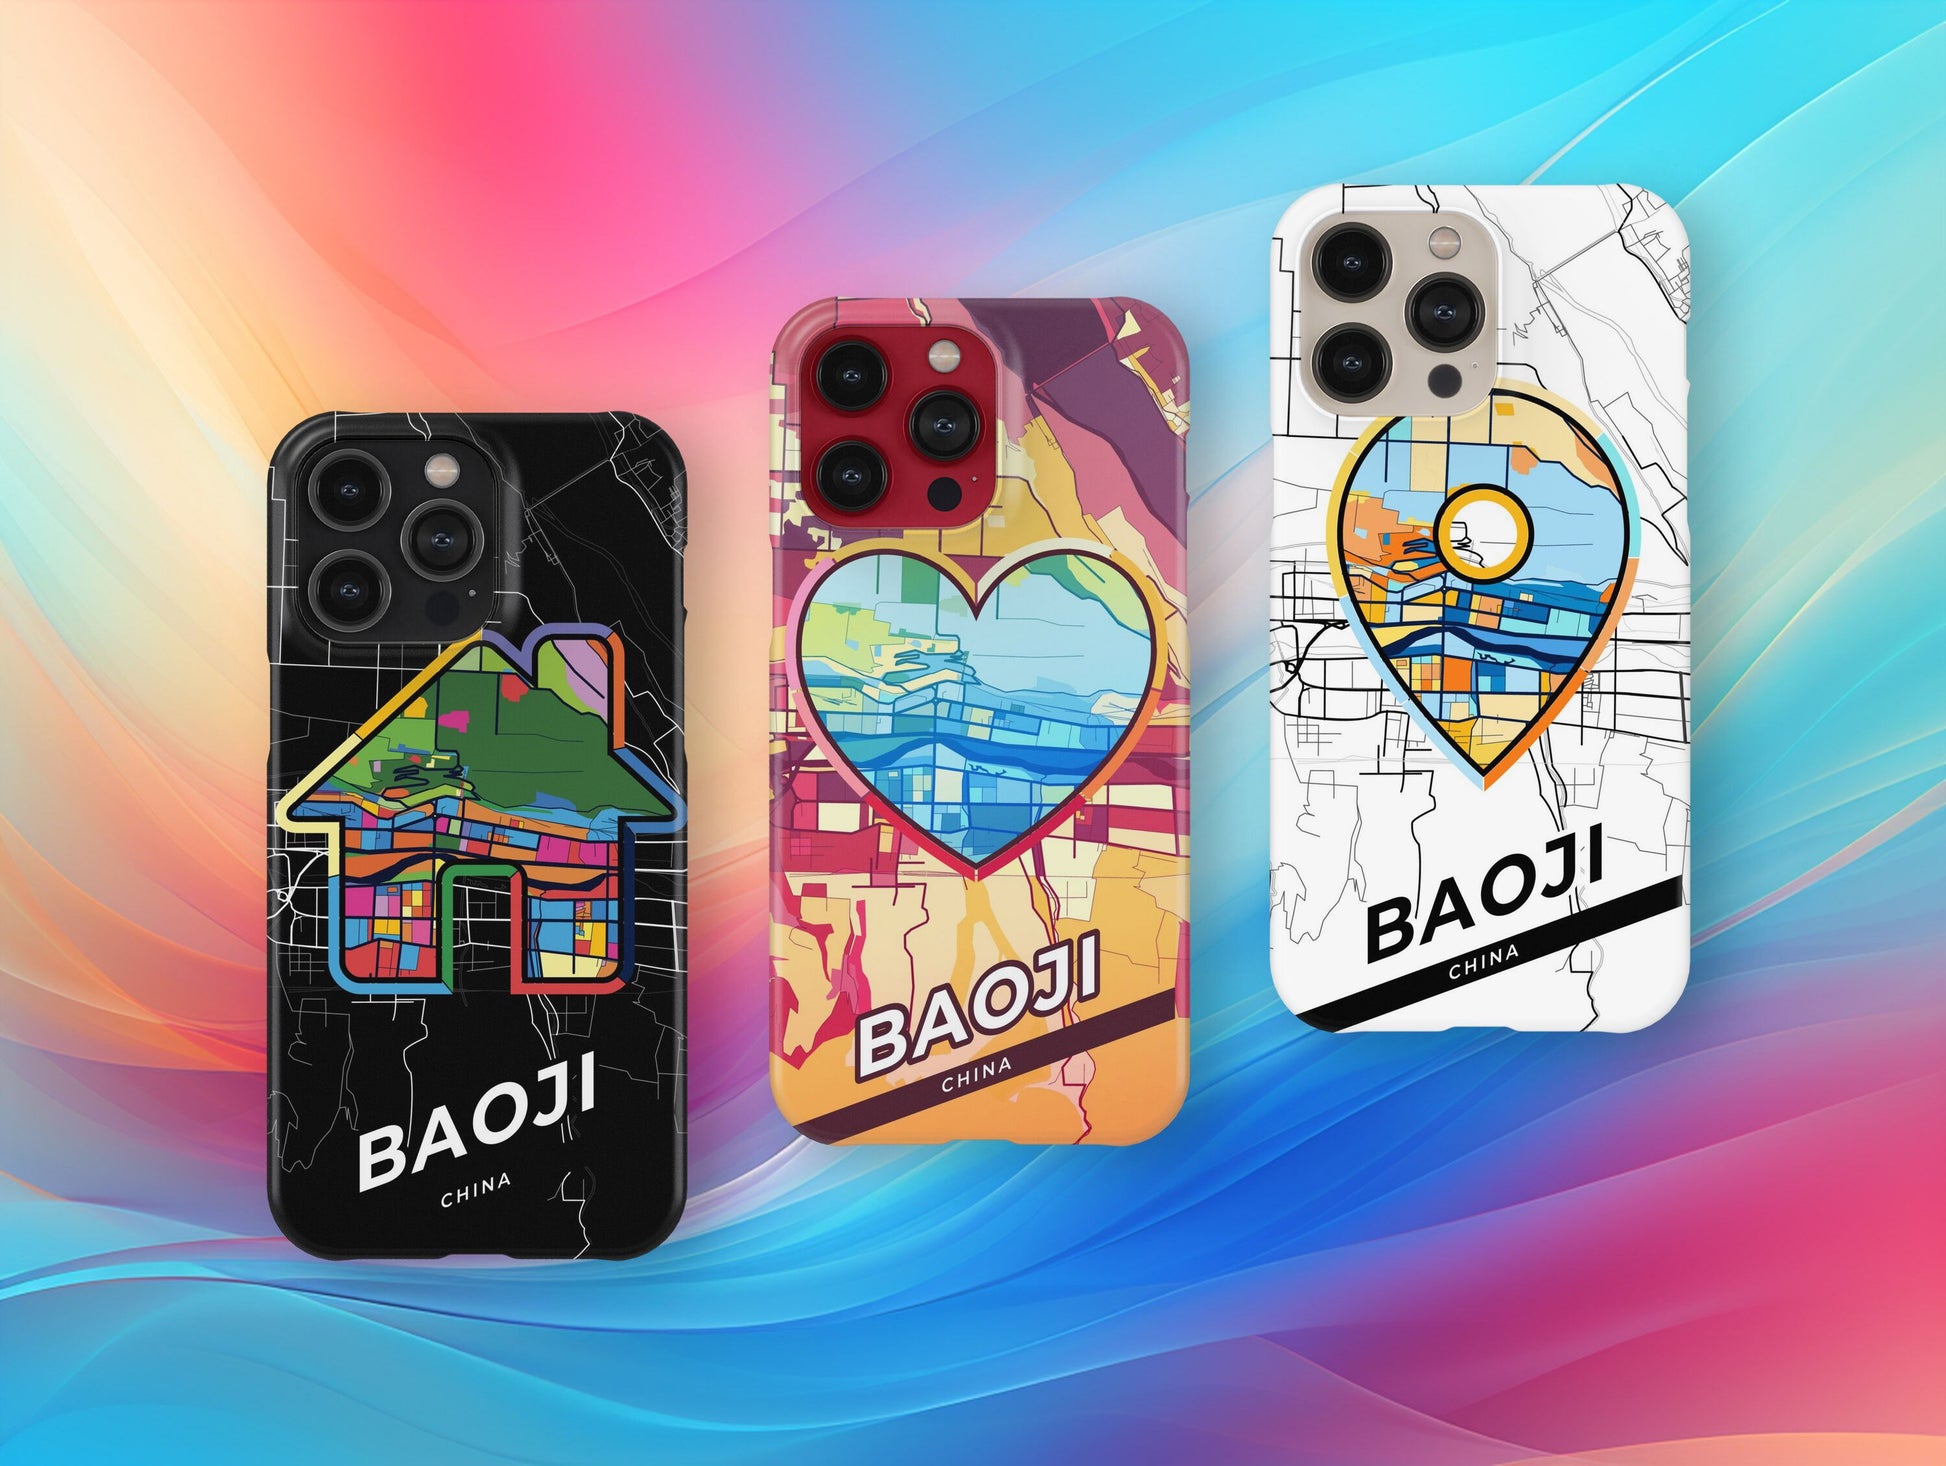 Baoji China slim phone case with colorful icon. Birthday, wedding or housewarming gift. Couple match cases.